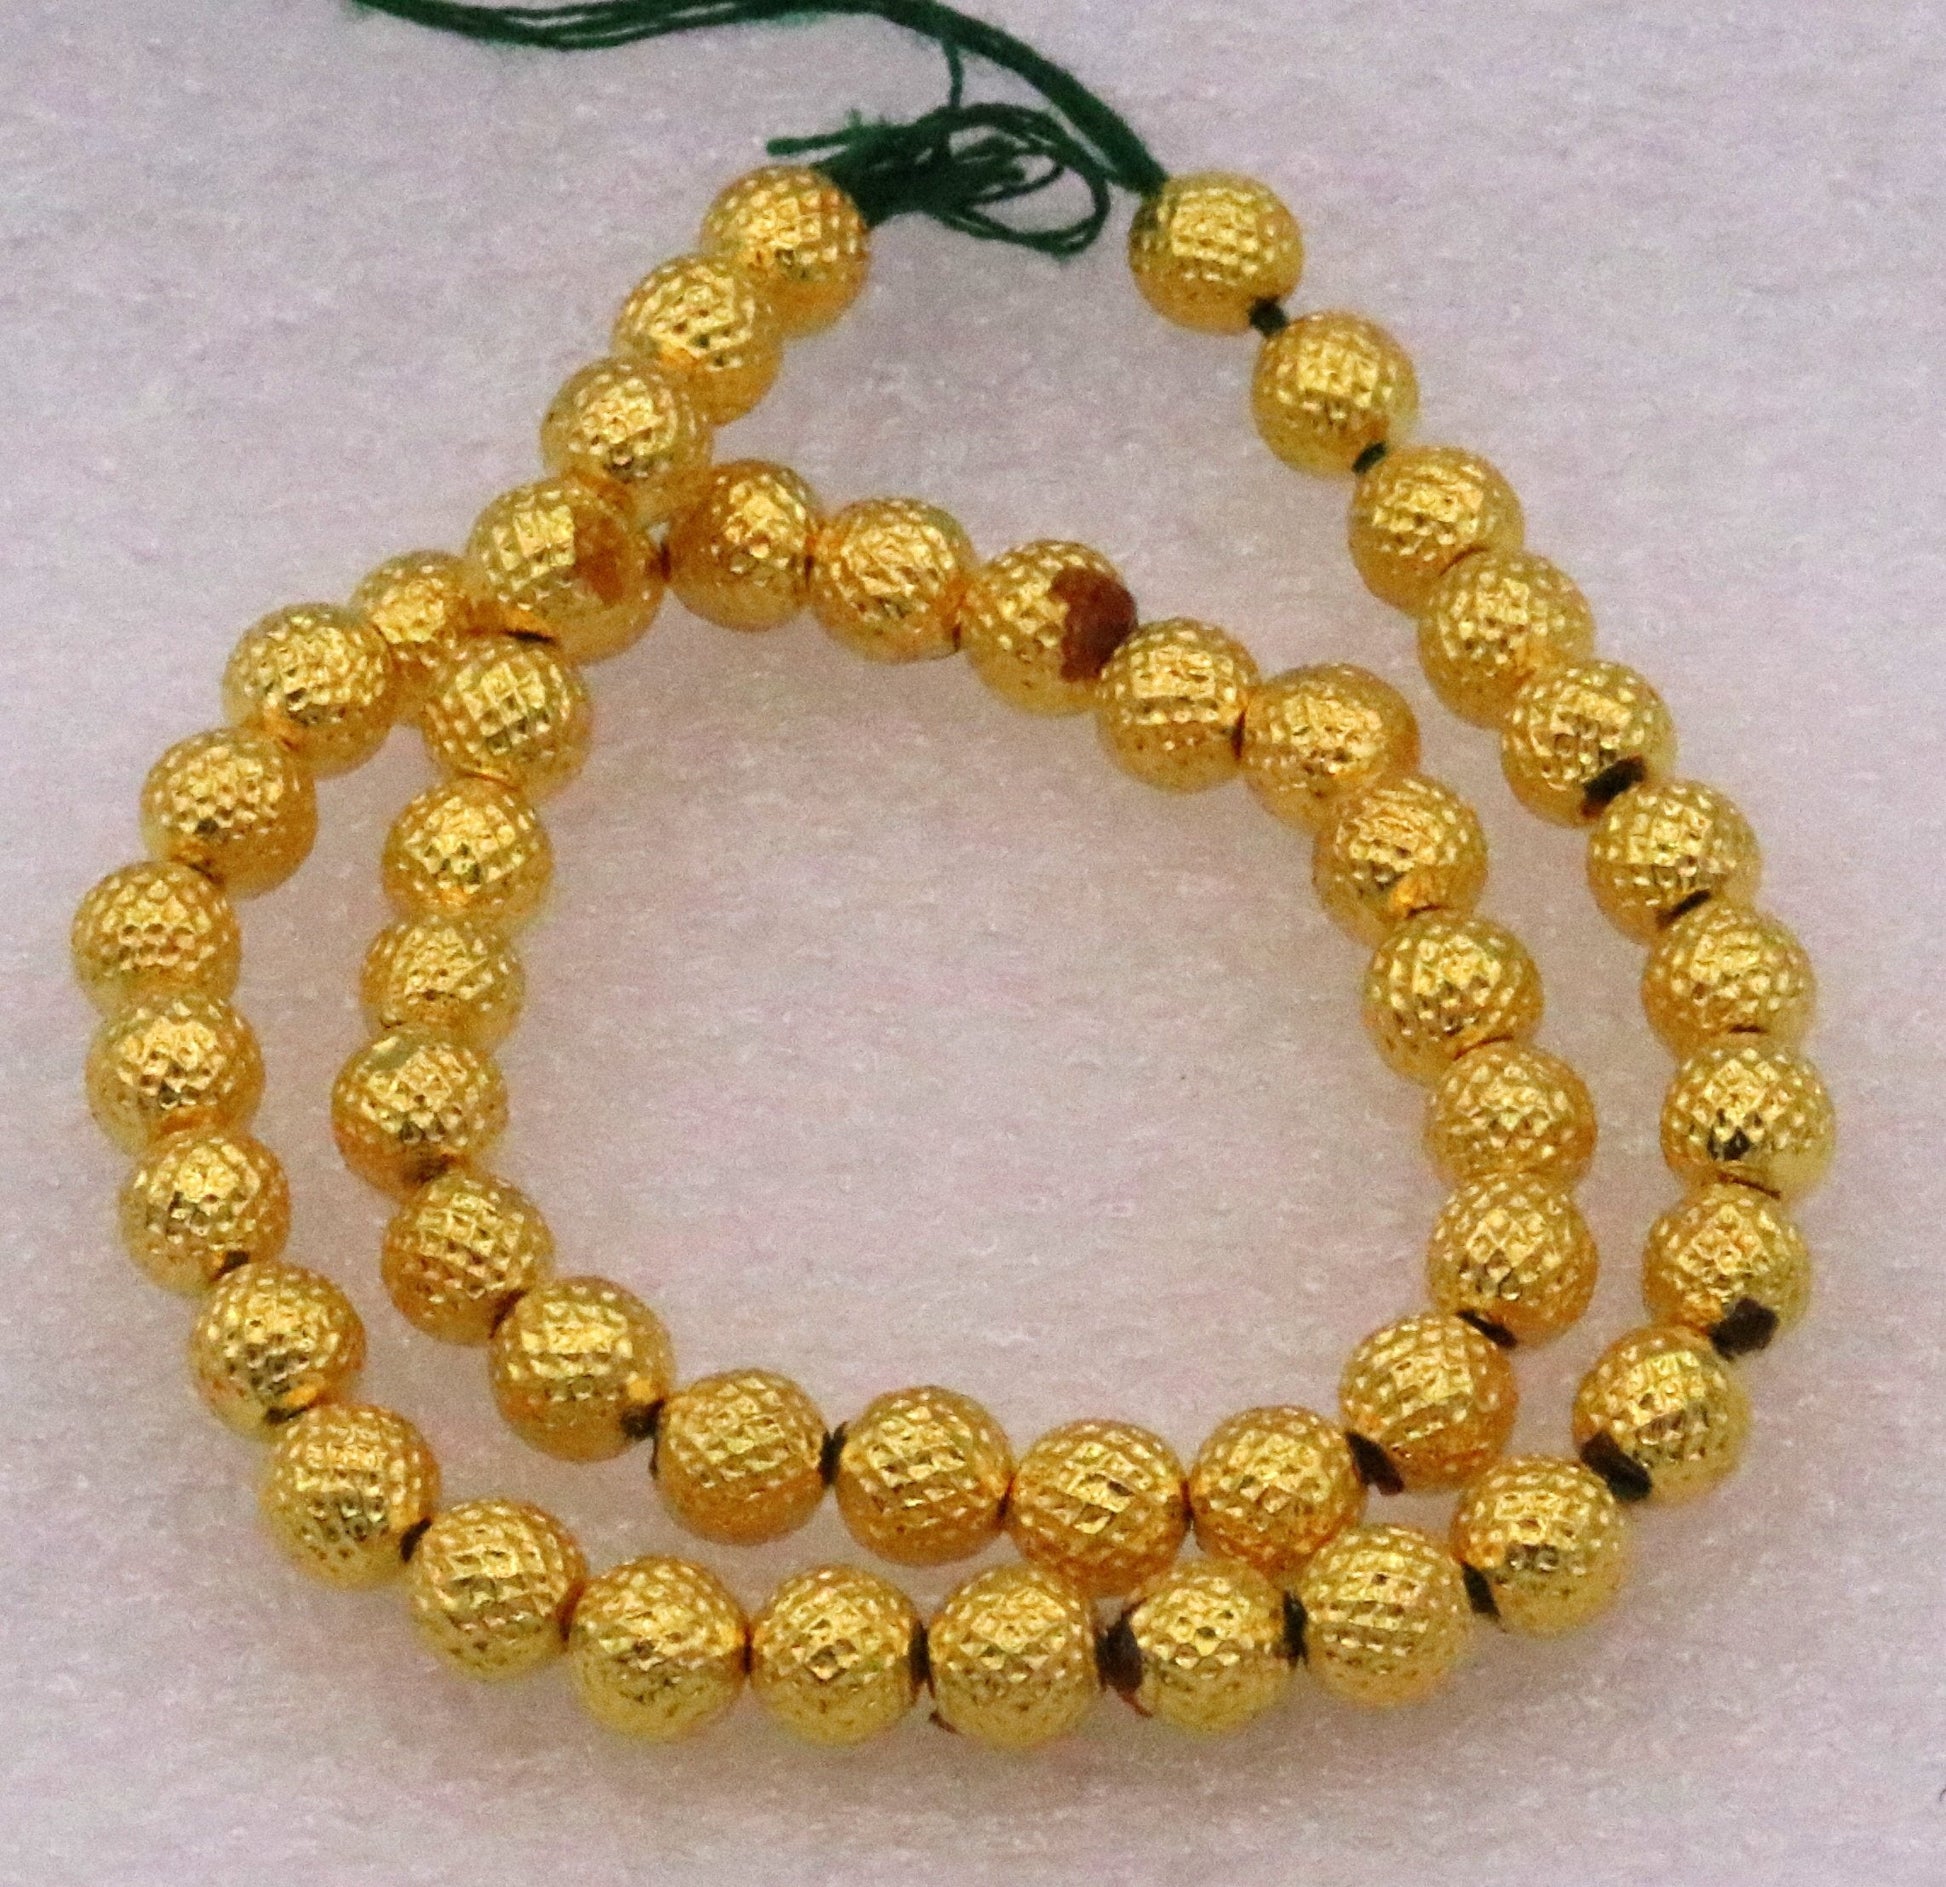 Lot 20 pieces Vintage handmade 20kt yellow gold beads ball for excellent jewelry making idea tribal rajasthani beads - TRIBAL ORNAMENTS